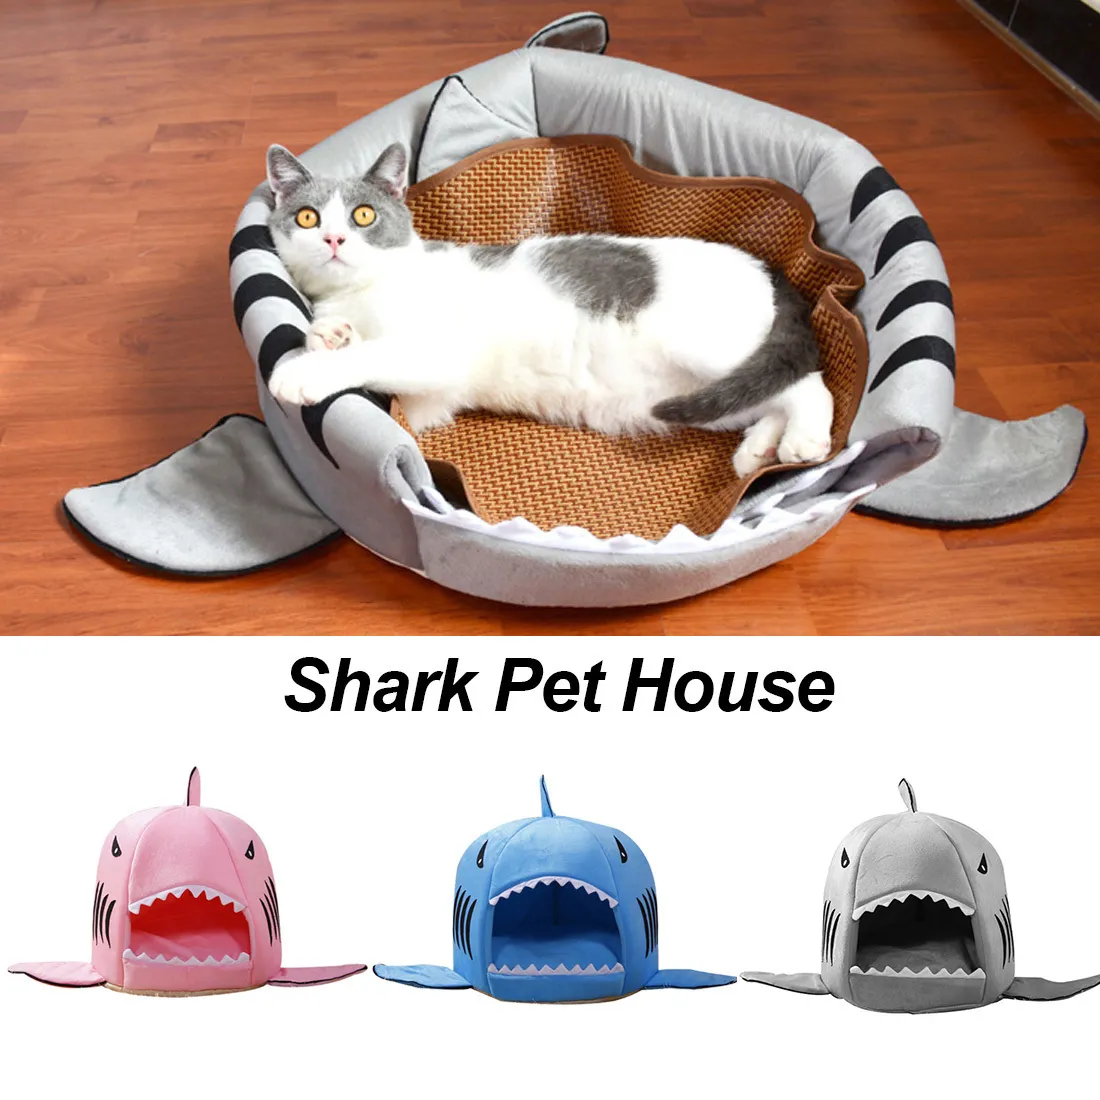 Soft Shark Pet Dog Cat Kennel House Tente Doggy Winter Coussin chaud Panier Animal Bed Cave Fournitures pour animaux de compagnie LJ201203